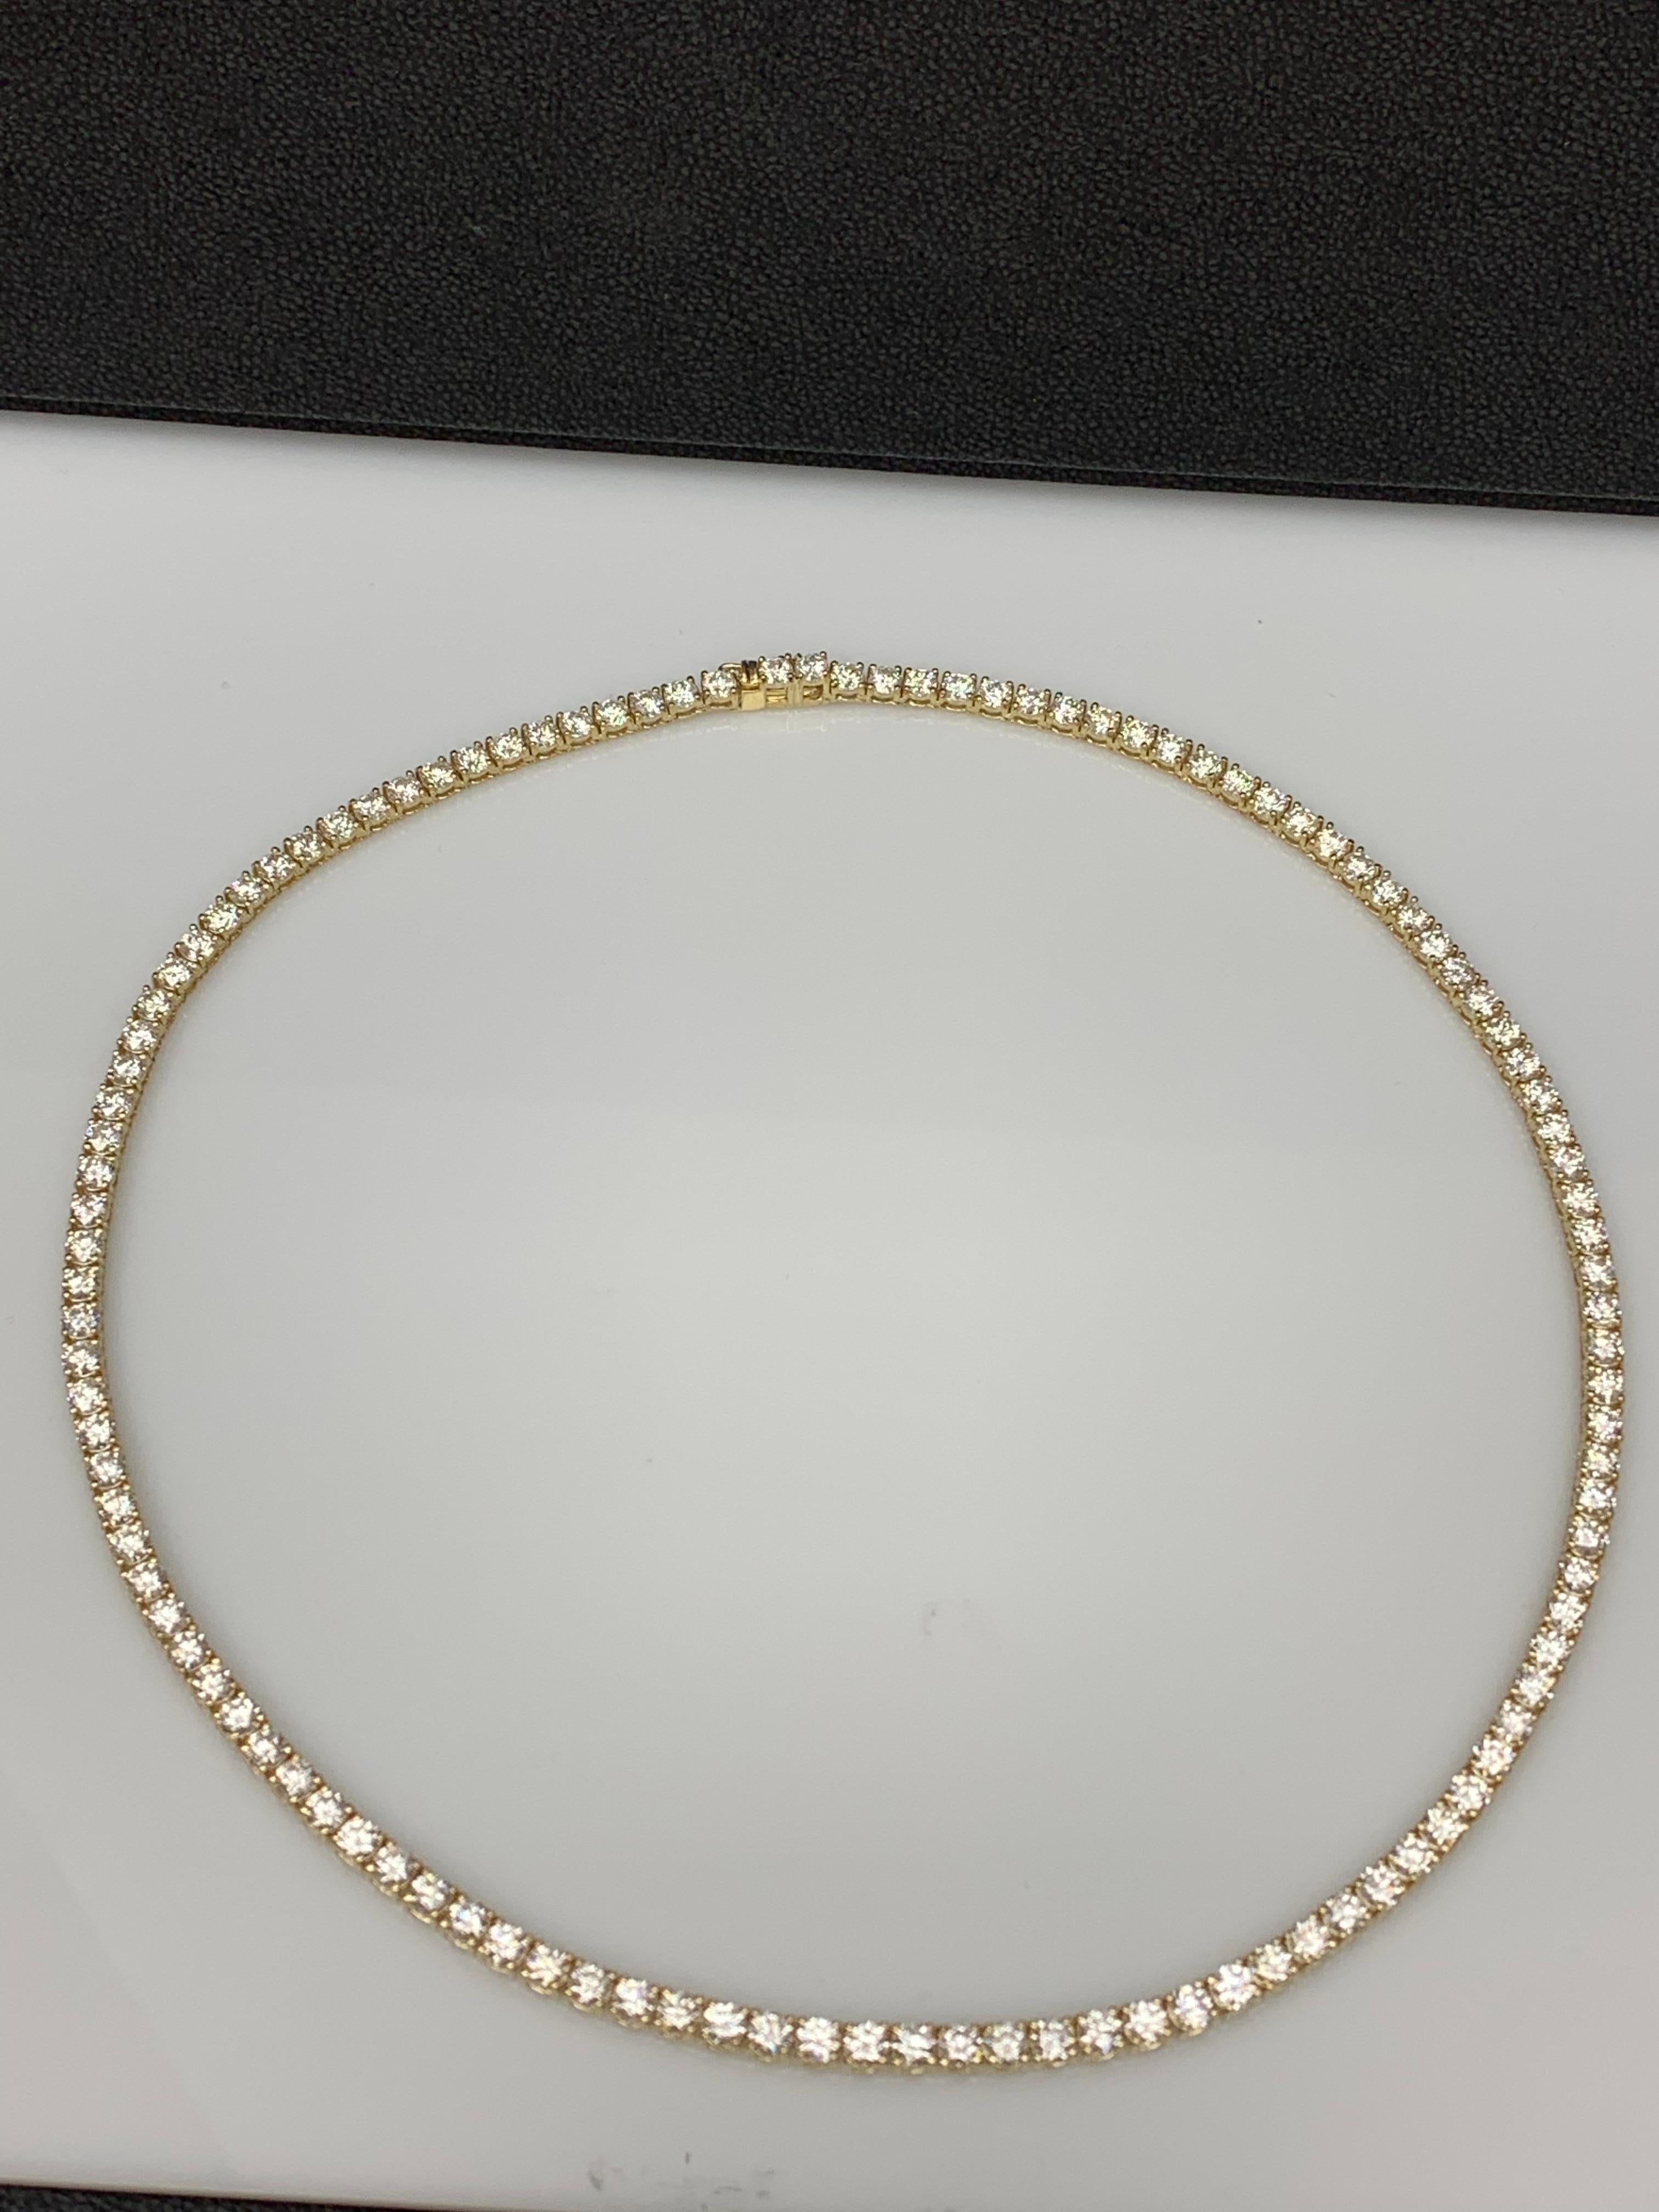 18 Carat Diamond Tennis Necklace in 14K Yellow Gold For Sale 3